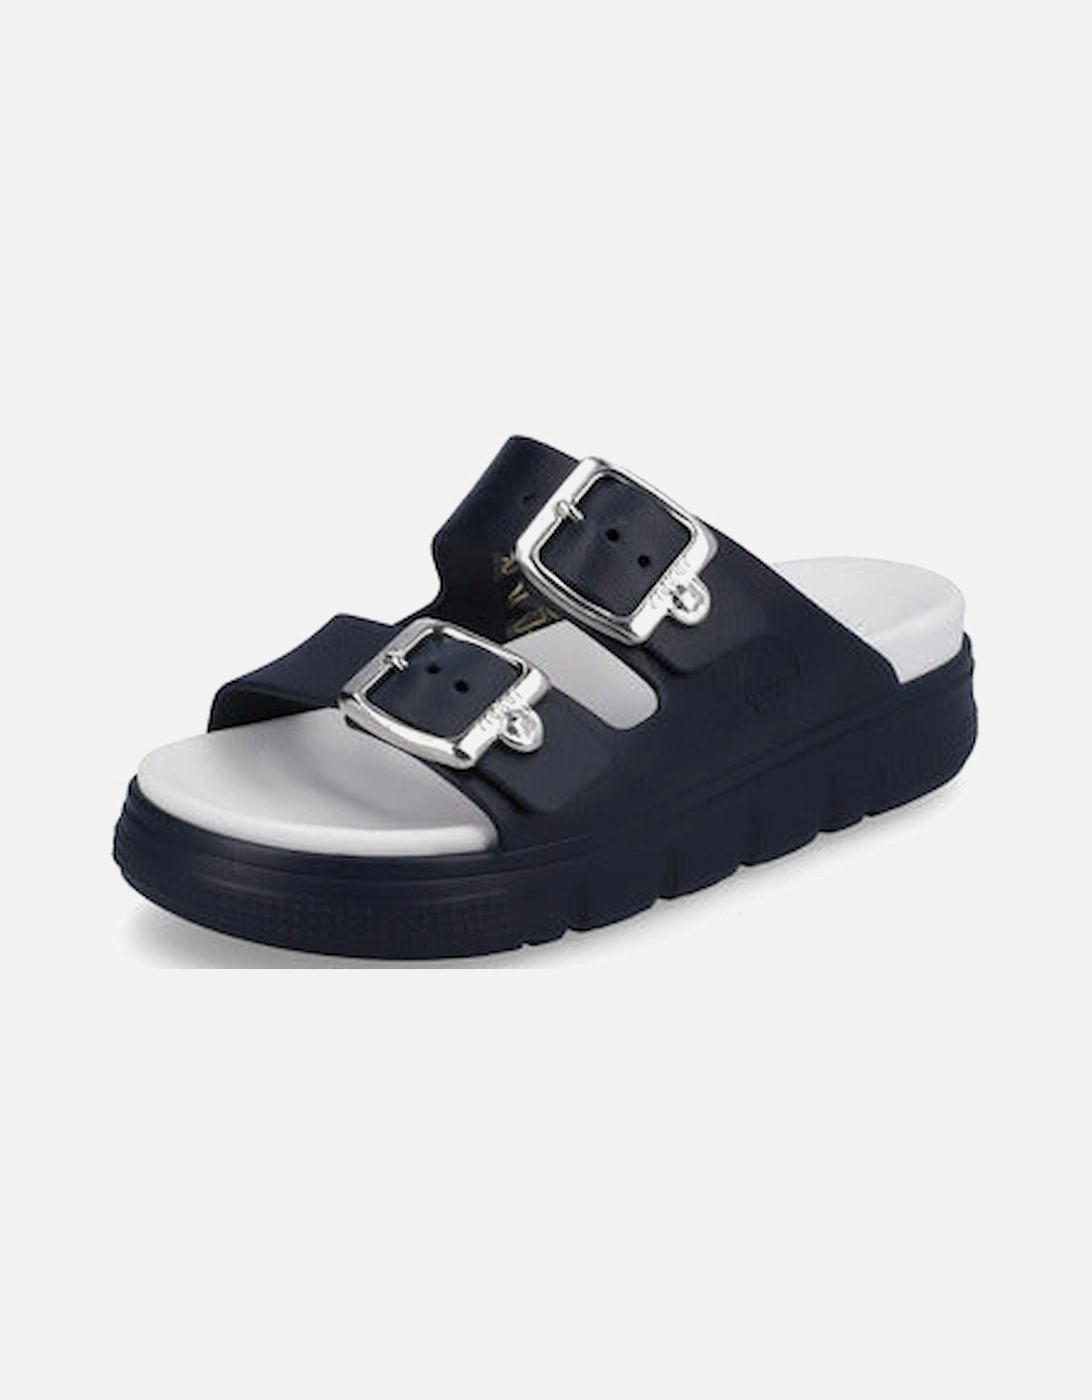 Womens sandals P2180 14 blue, 2 of 1